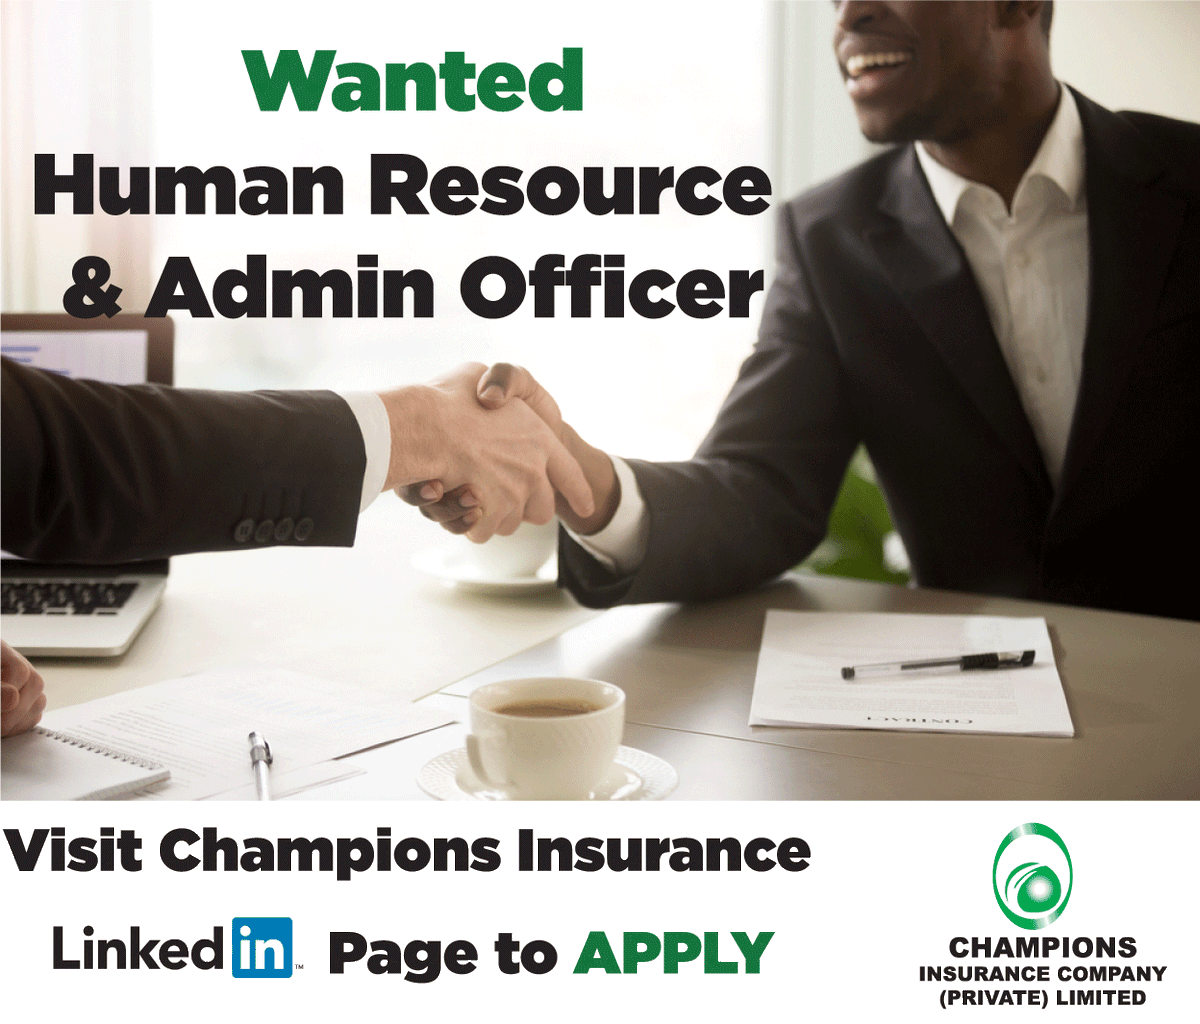 We are looking for a Human Resources & Admin Officer to join the #CHAMPIONSTEAM 😎 Follow the instructions in the attached document to apply today! Application deadline: September 30, 2022 @1630hrs. #JobAlert Click the link below to apply today: bit.ly/hr-and-admin-o…